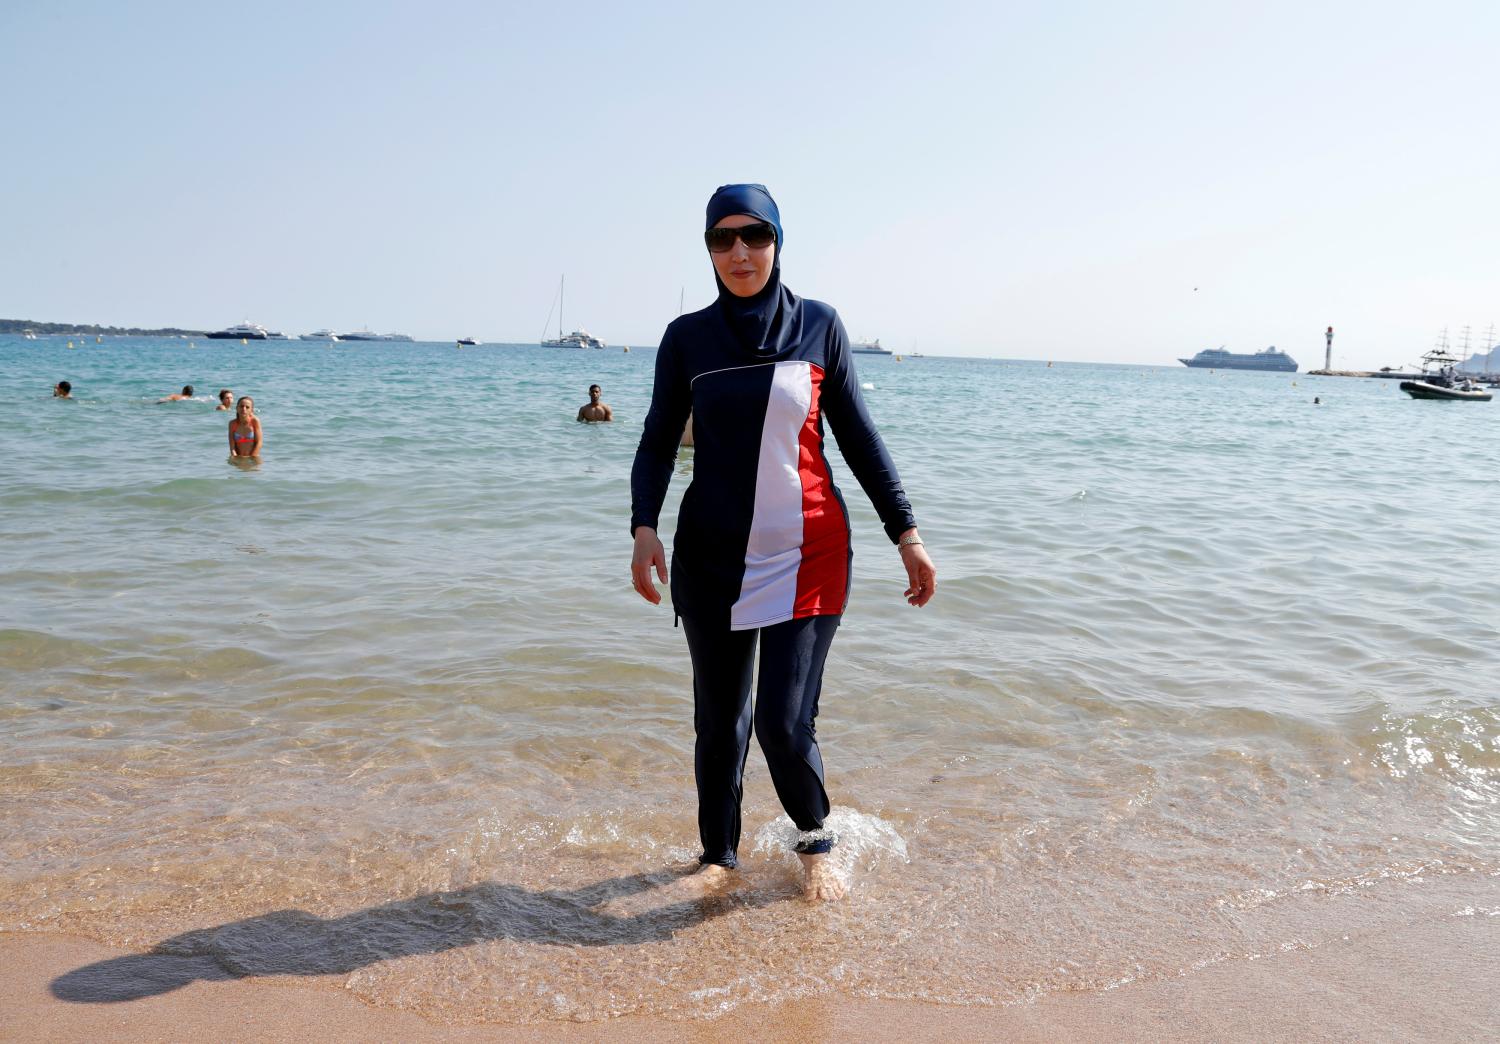 70th Cannes Film Festival - Cannes, France. 27/05/2017. Karima, wearing a full-body burkini swimsuit, walks on a beach in Cannes after the call to support the wearing of burkinis by businessman and political activist Rachid Nekkaz. REUTERS/Eric Gaillard